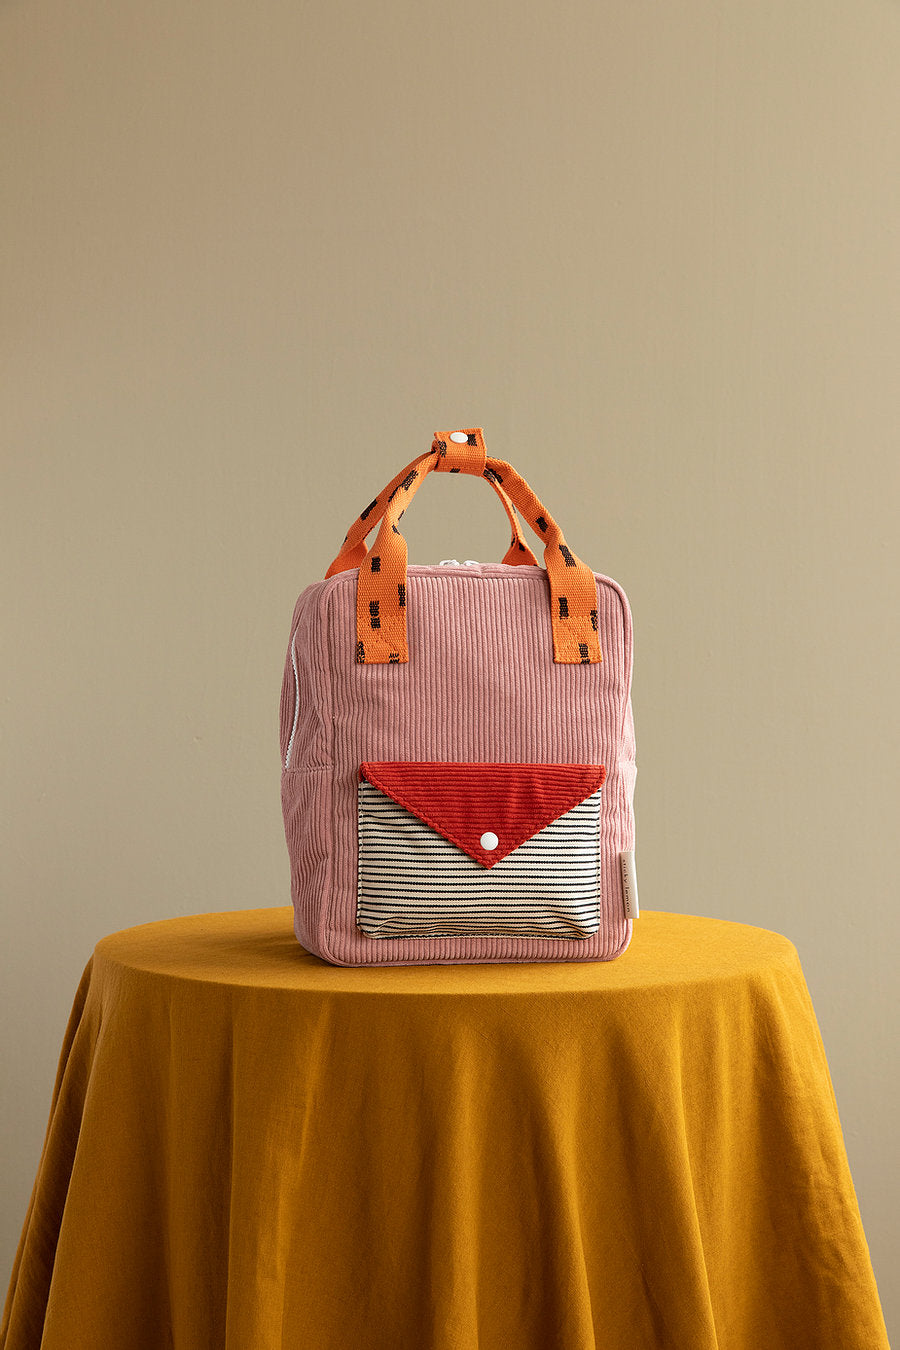 Sticky Lemon Corduroy Collection Envelope Small Backpack, Dusty Pink/Marmalade/Carrot Orange